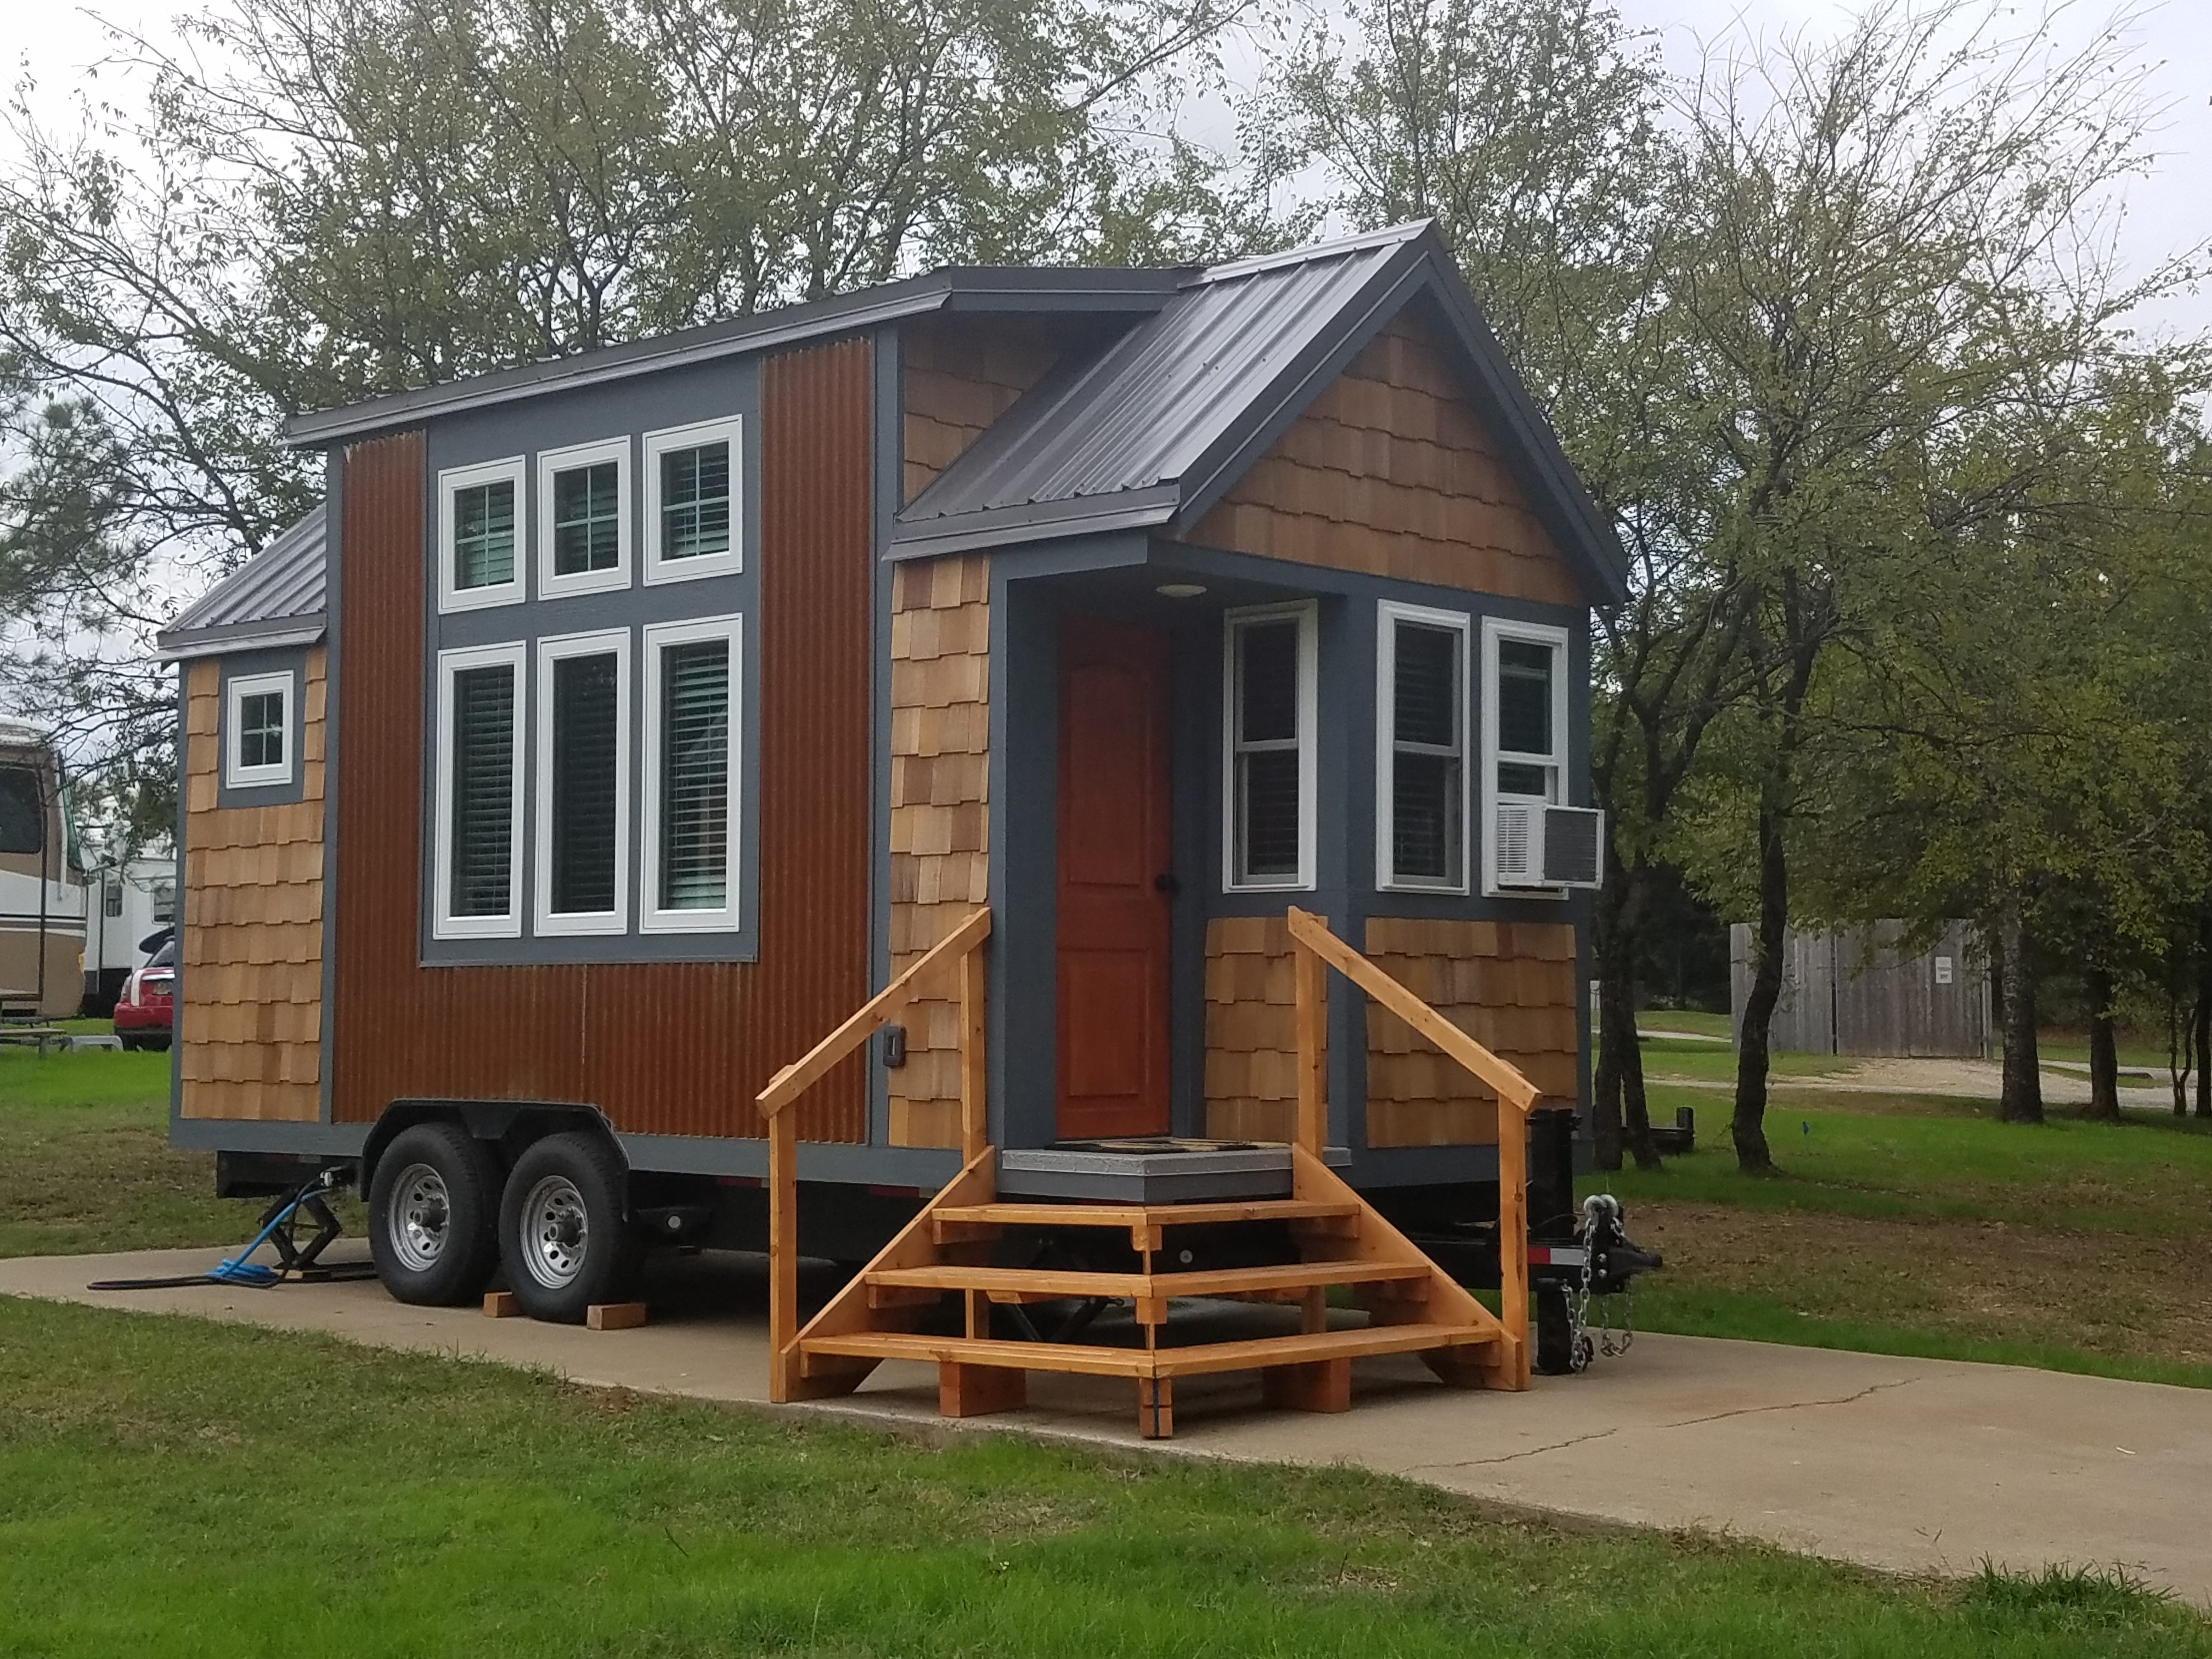  Tiny  Houses  in Texas RV PARK CANTON TX CABIN RENTALS 